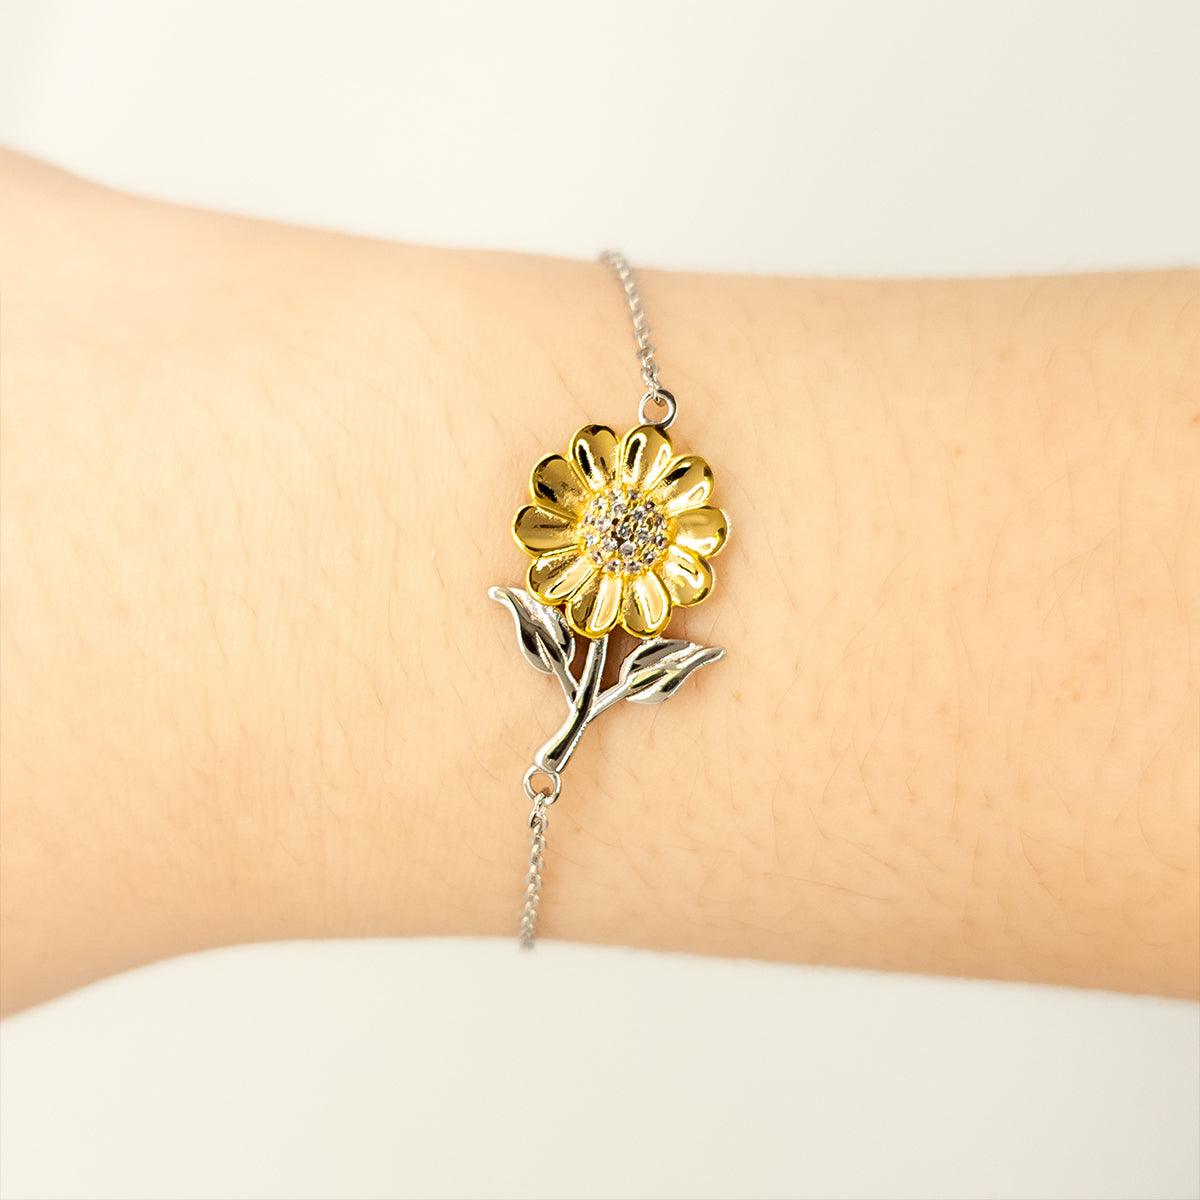 Florida is my home Gifts, Lovely Florida Birthday Christmas Sunflower Bracelet For People from Florida, Men, Women, Friends - Mallard Moon Gift Shop